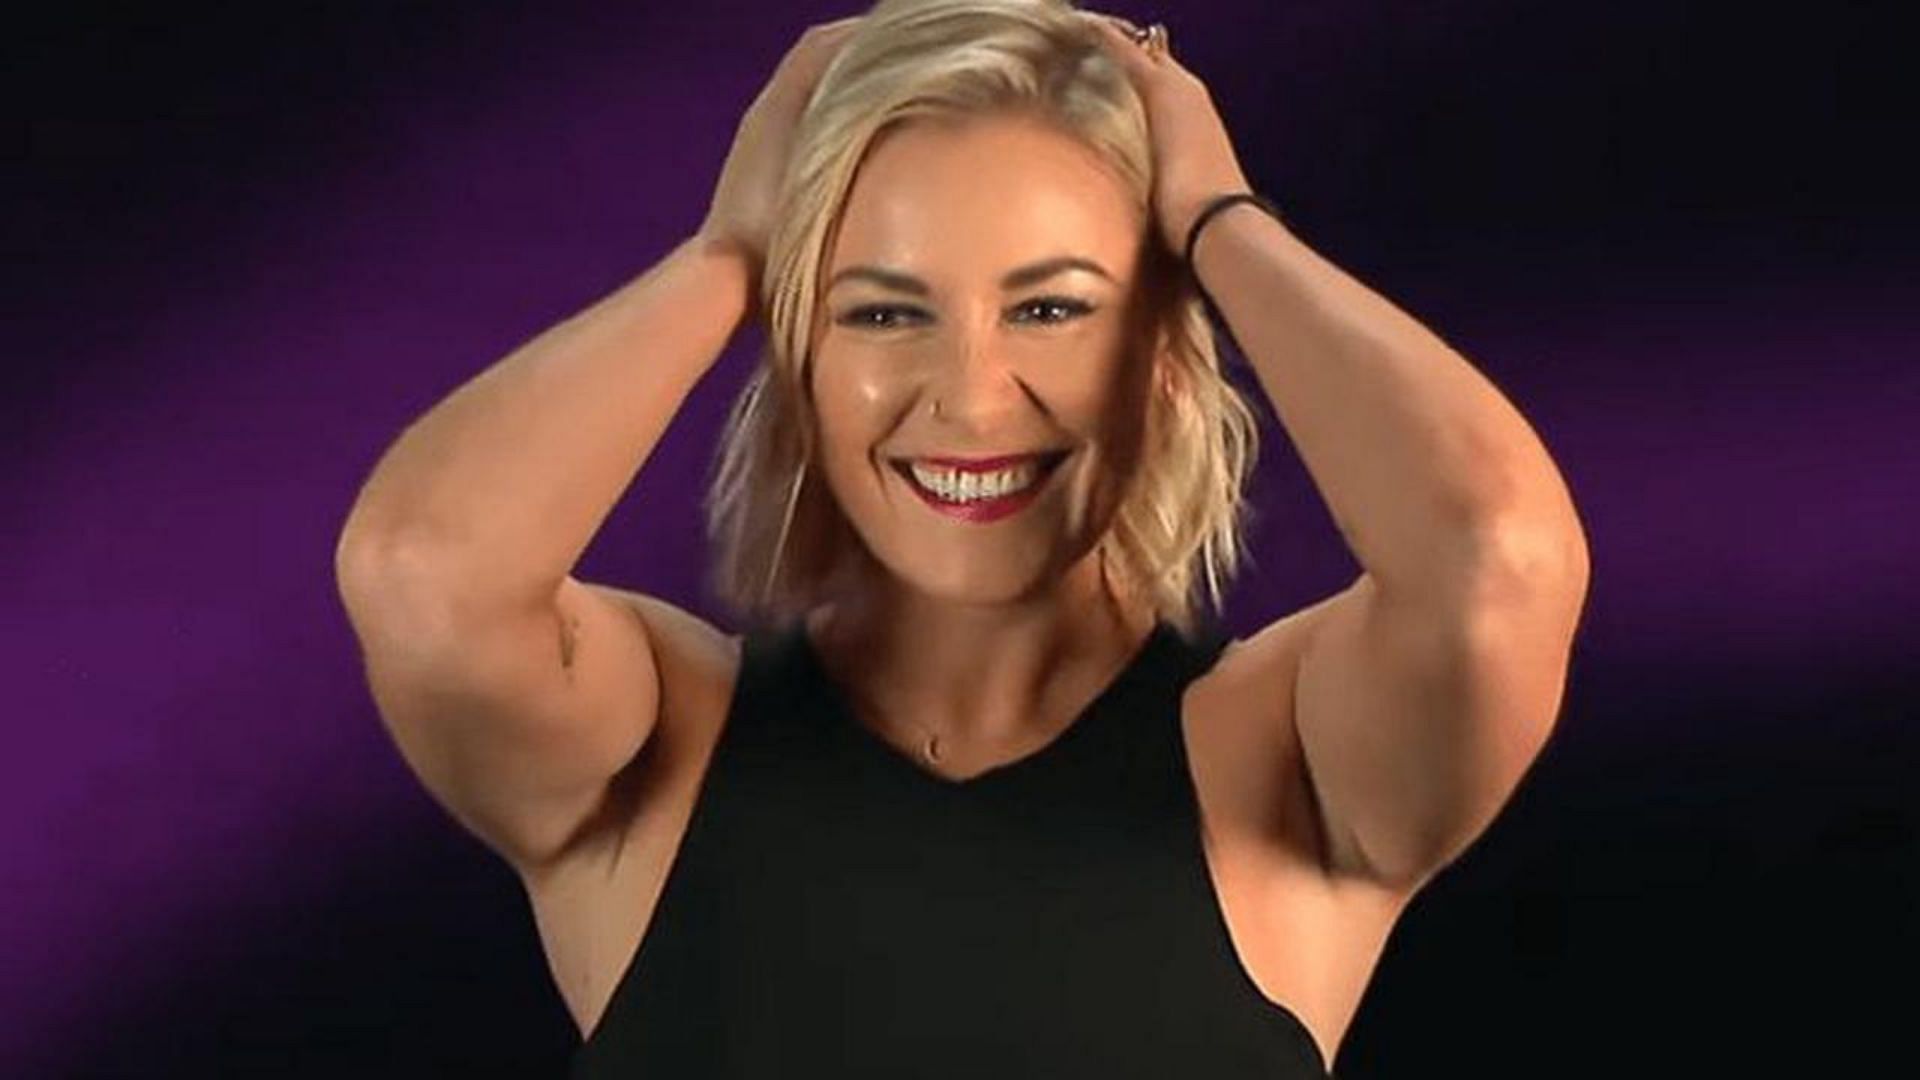 Renee Paquette is a big fan of the AEW&#039;s women&#039;s division